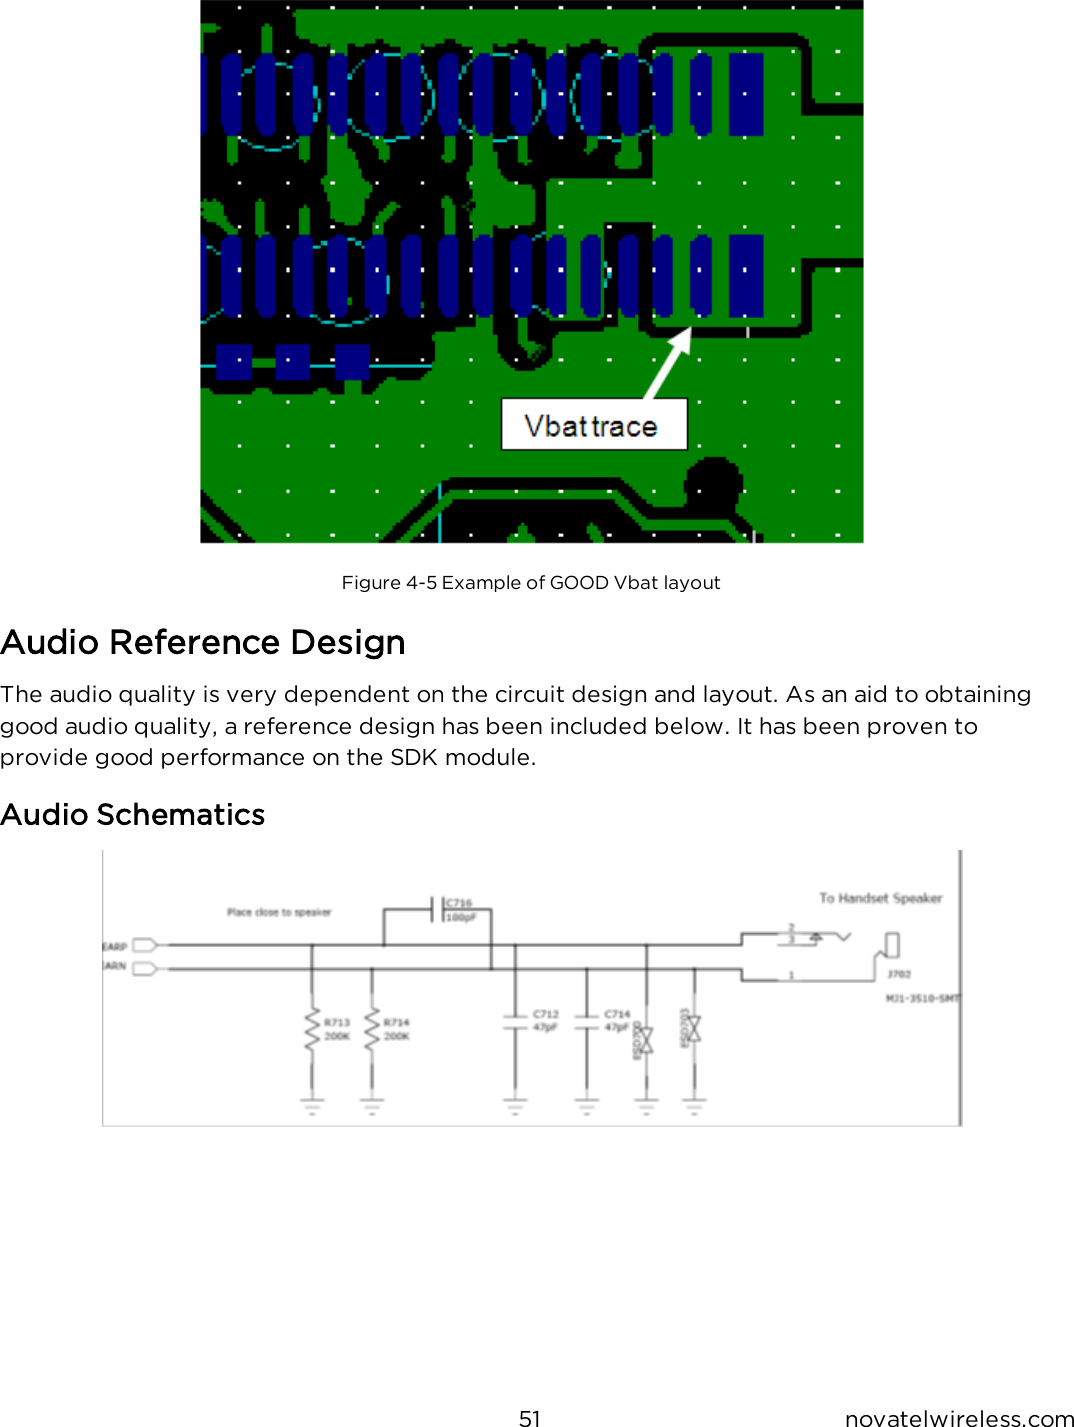 51 novatelwireless.comFigure 4-5 Example of GOOD Vbat layoutAudio Reference DesignThe audio quality is very dependent on the circuit design and layout.  As an aid to obtaining good audio quality, a reference design has been included below.  It has been proven to provide good performance on the SDK module.Audio Schematics